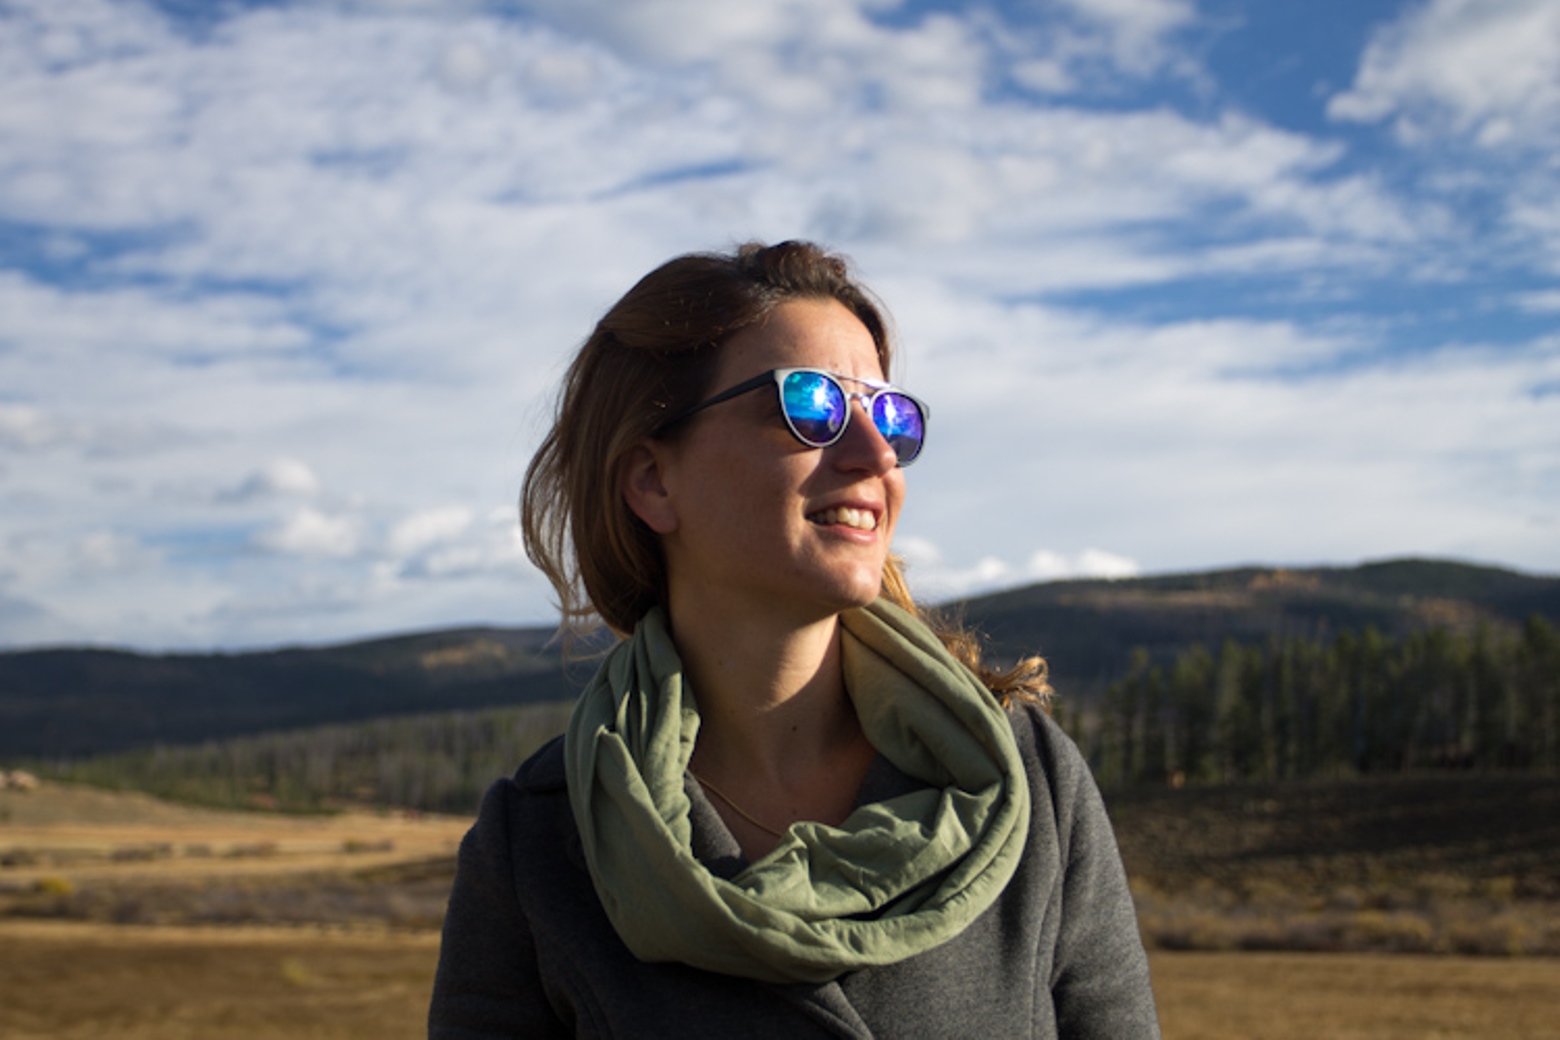 Noa Margalit on the Devil’s Thumb Ranch in Colorado during The Harvest. Photo by Ksenia Prints